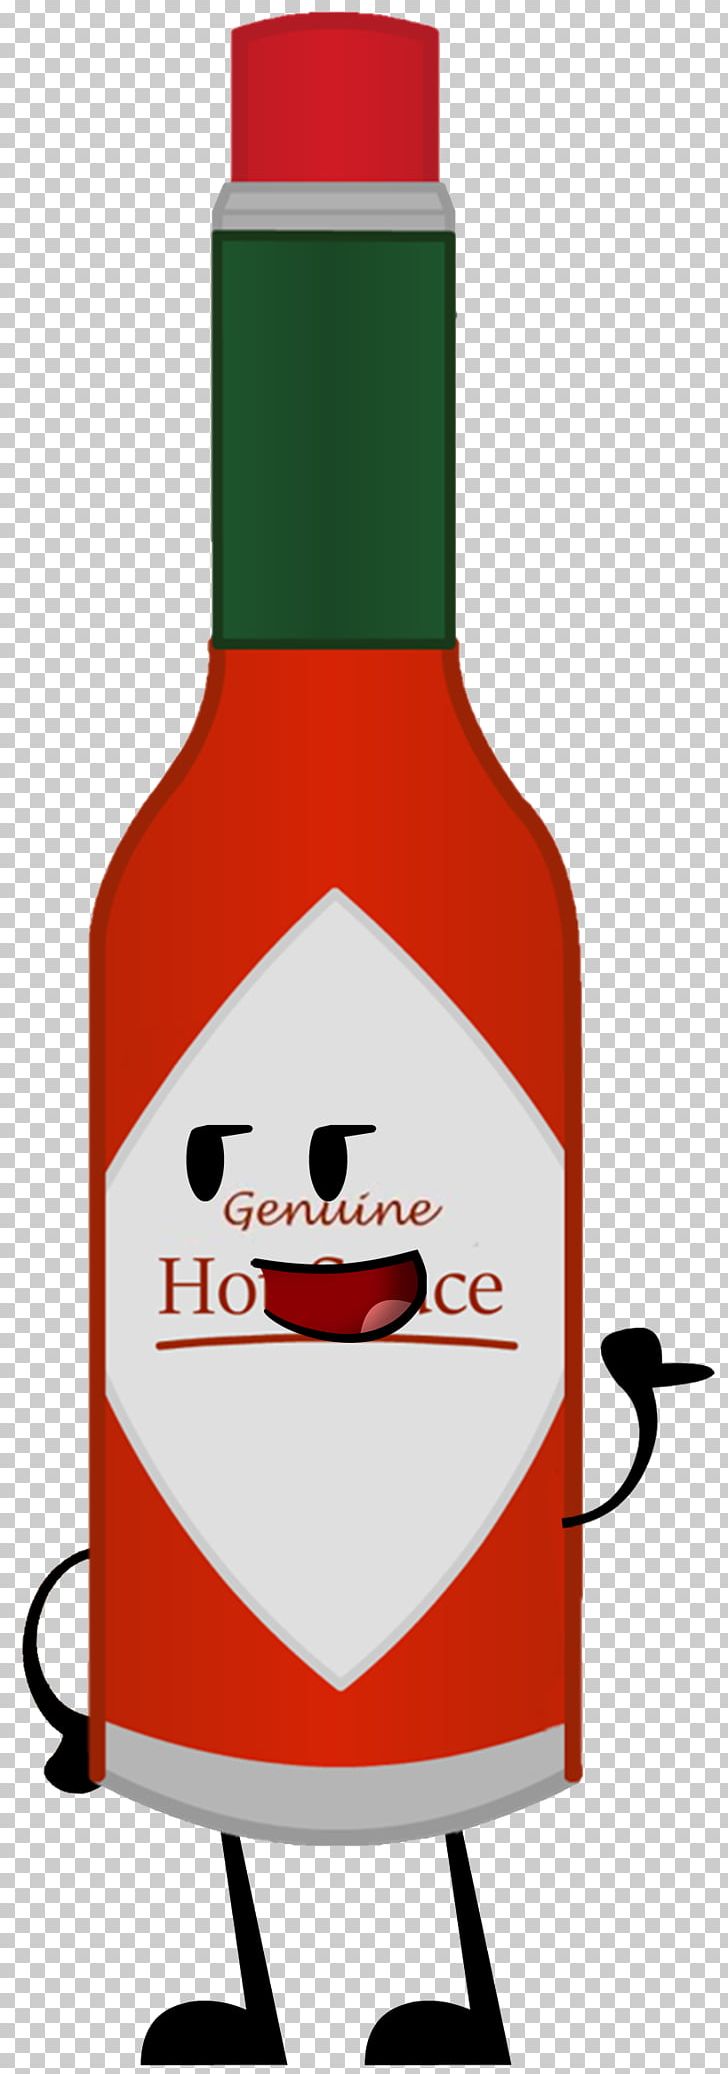 Hot Dog Barbecue Sauce Hot Sauce PNG, Clipart, Art, Barbecue, Barbecue Sauce, Bottle, Character Free PNG Download